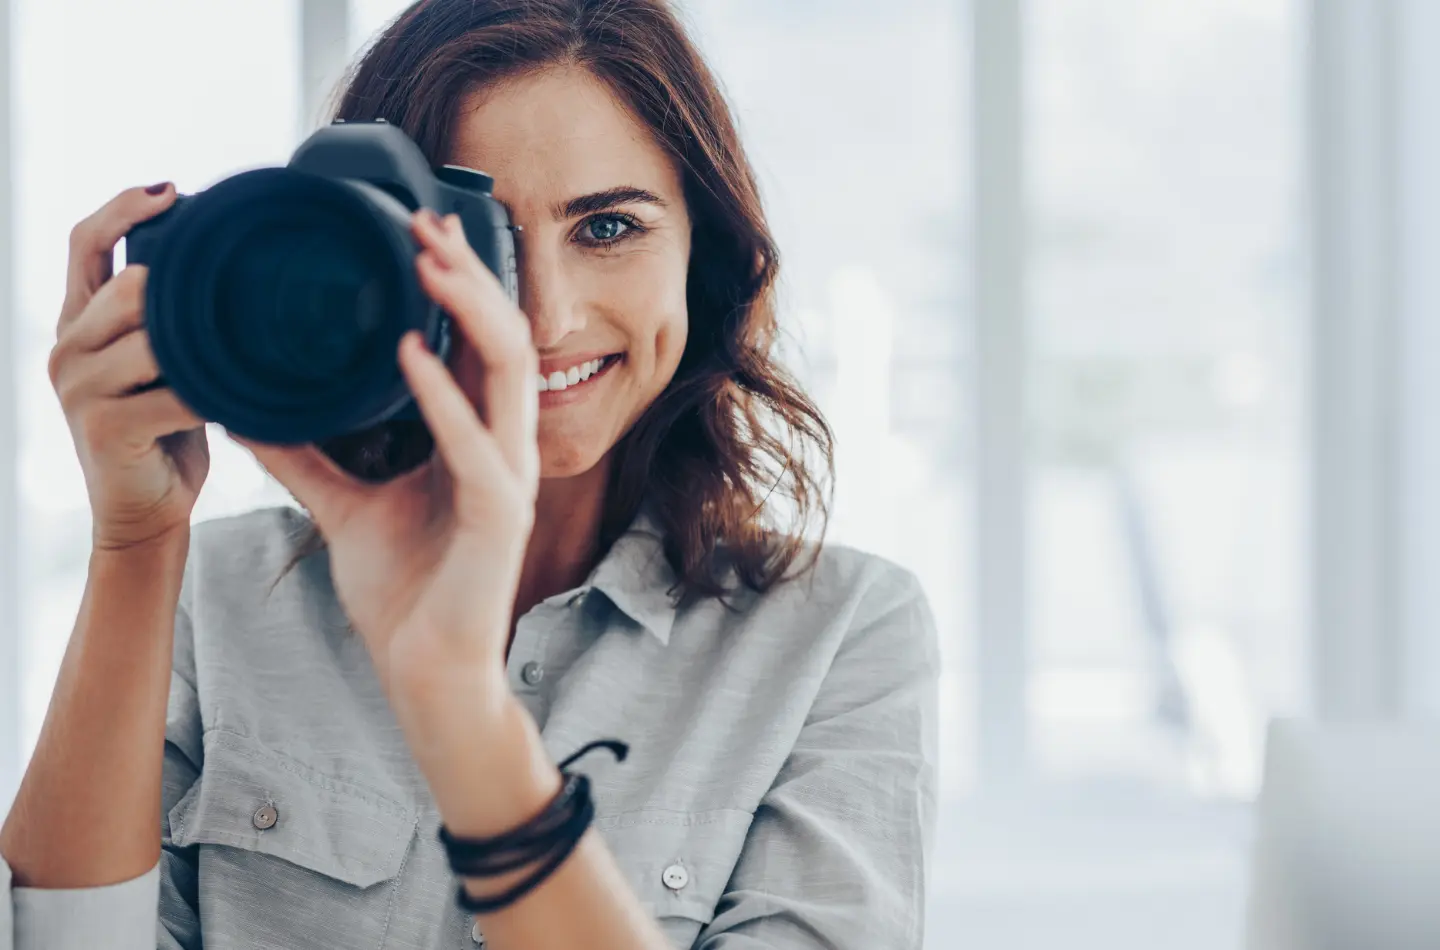 Become a Successful woman Personal Photographer - Monetize your passion.